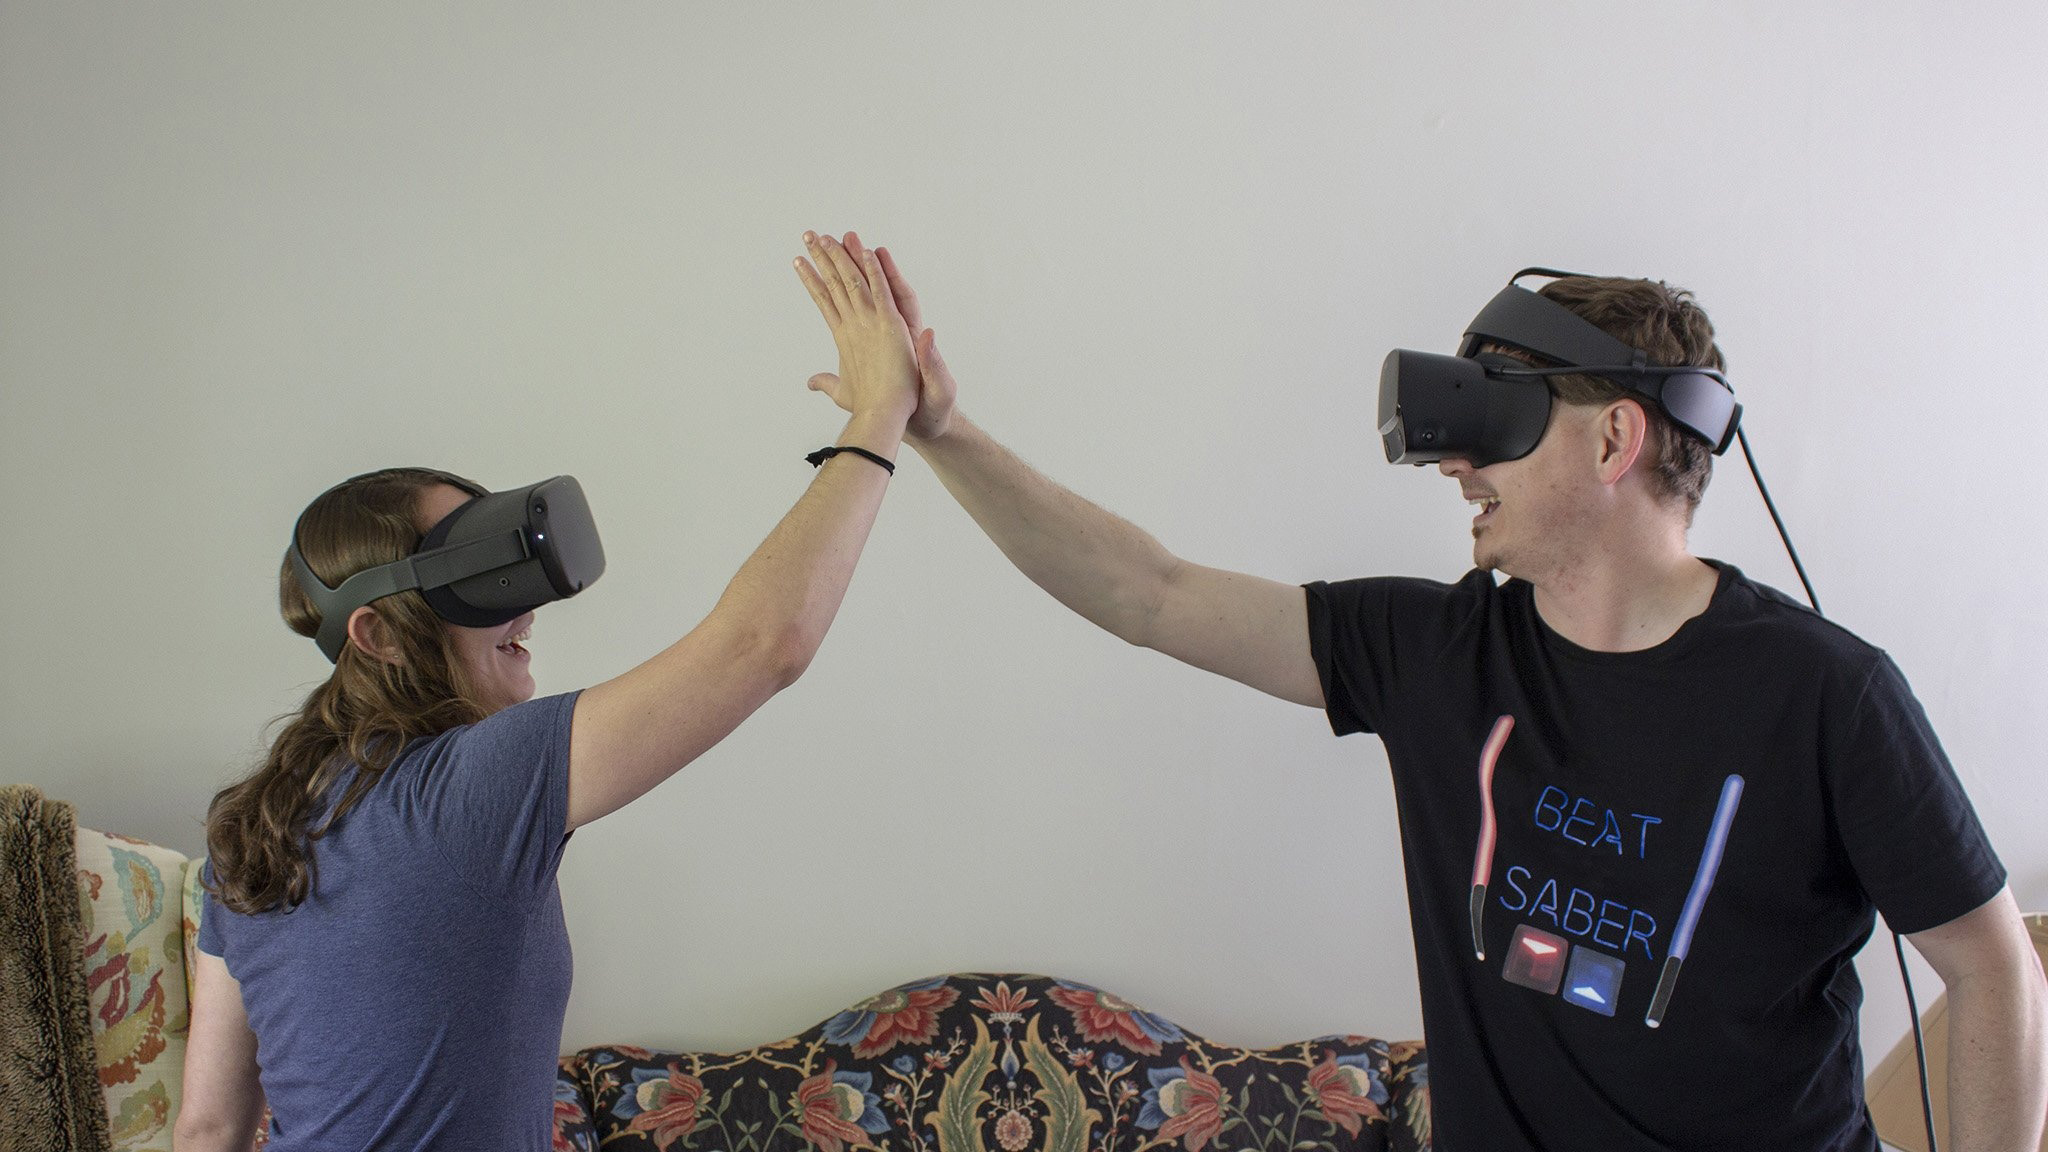 Two VR players high fiving each other while wearing an Oculus Quest and a Rift S